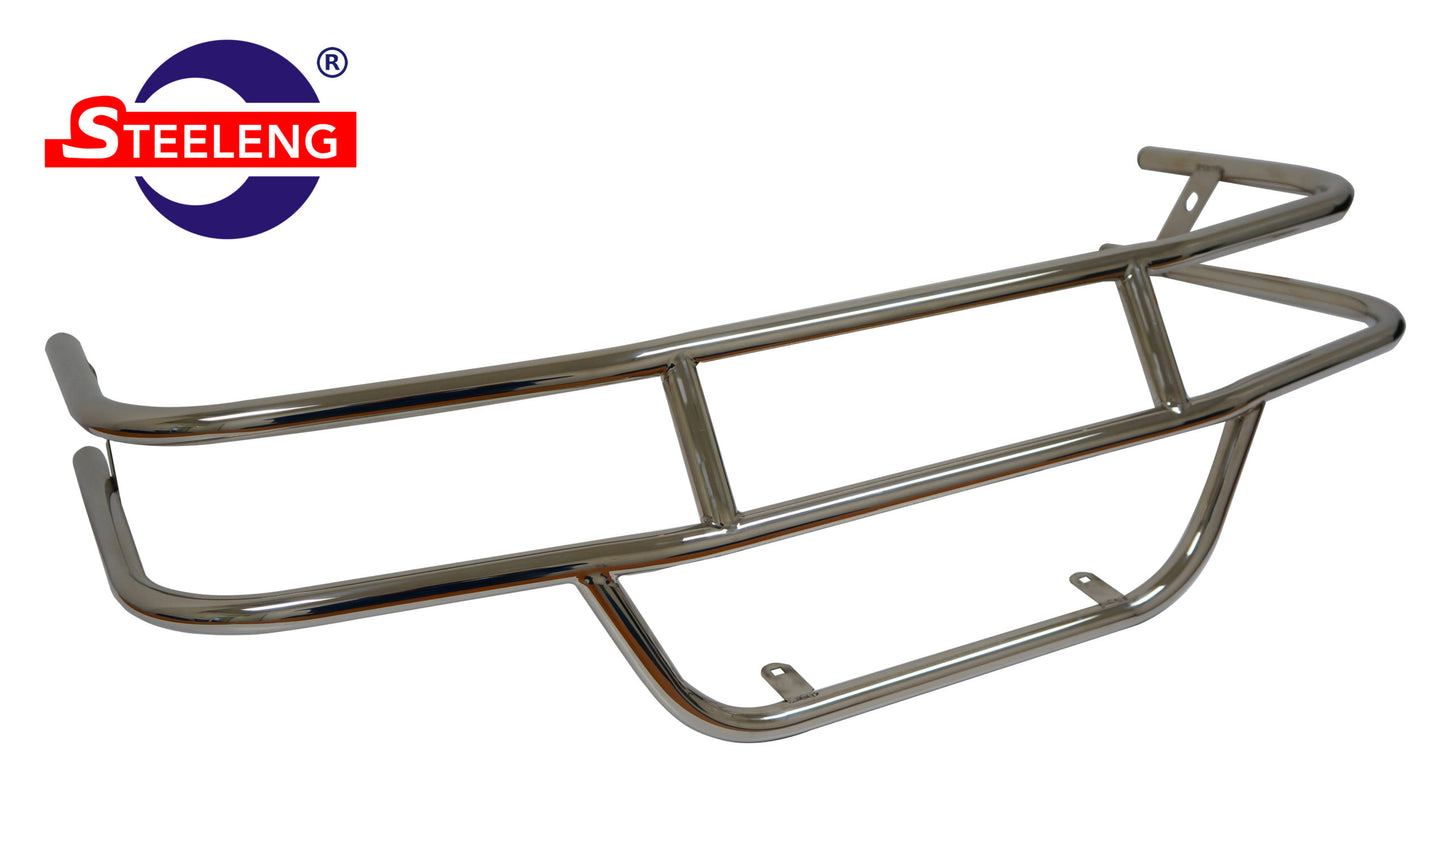 SGC POLISHED STAINLESS STEEL BRUSH GUARD FOR EZGO TXT/PDS (1996-2013)